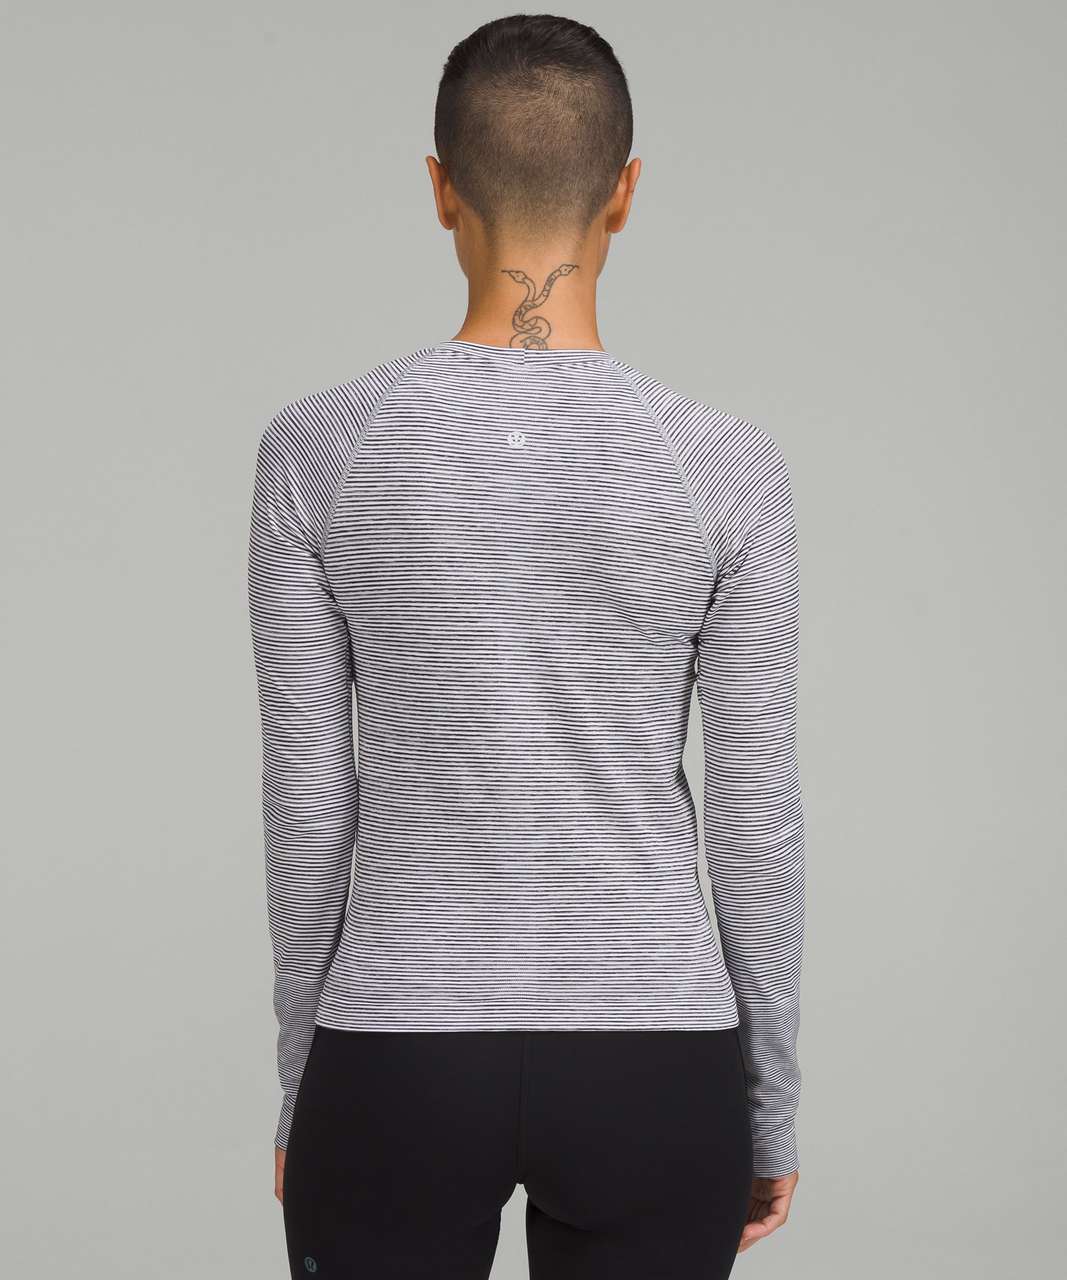 Lululemon Swiftly Tech Long Sleeve Shirt 2.0 *Race Length - Wee Are From Space White